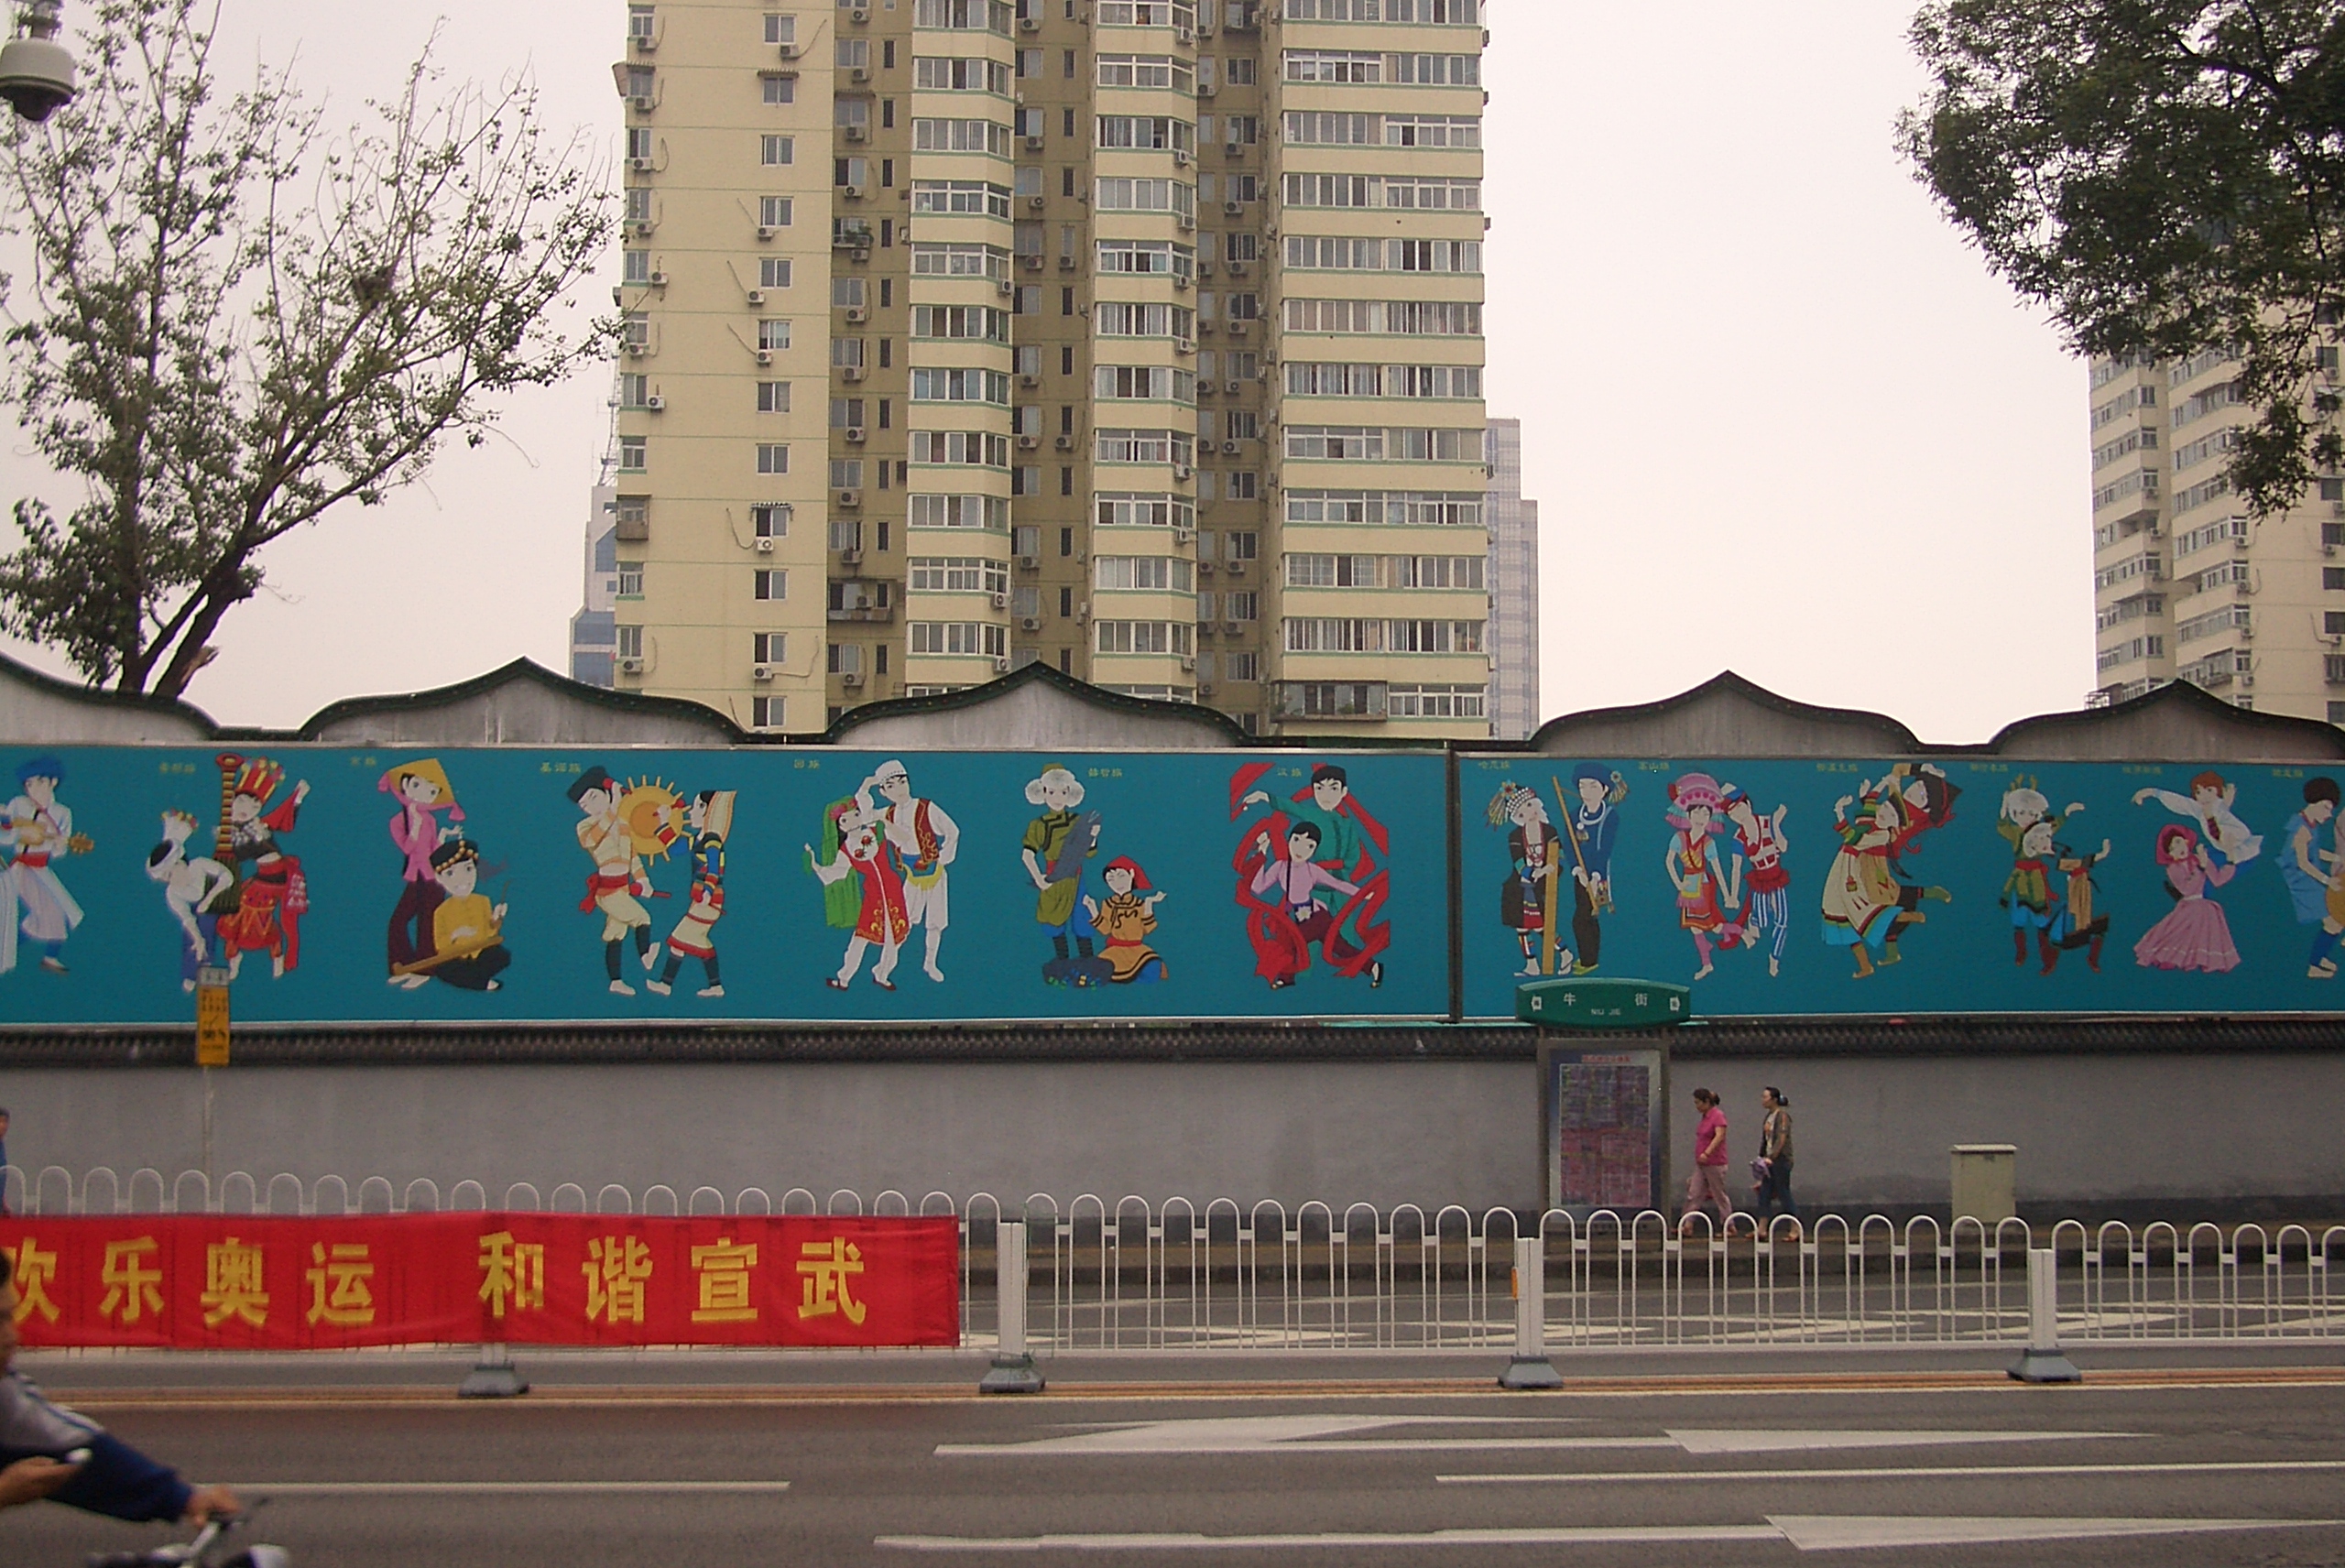 An entire block in Beijing is decorated with a poster depicting all 56 "recognized" ethnic groups of China (including Han) forming "The great united family of peoples."